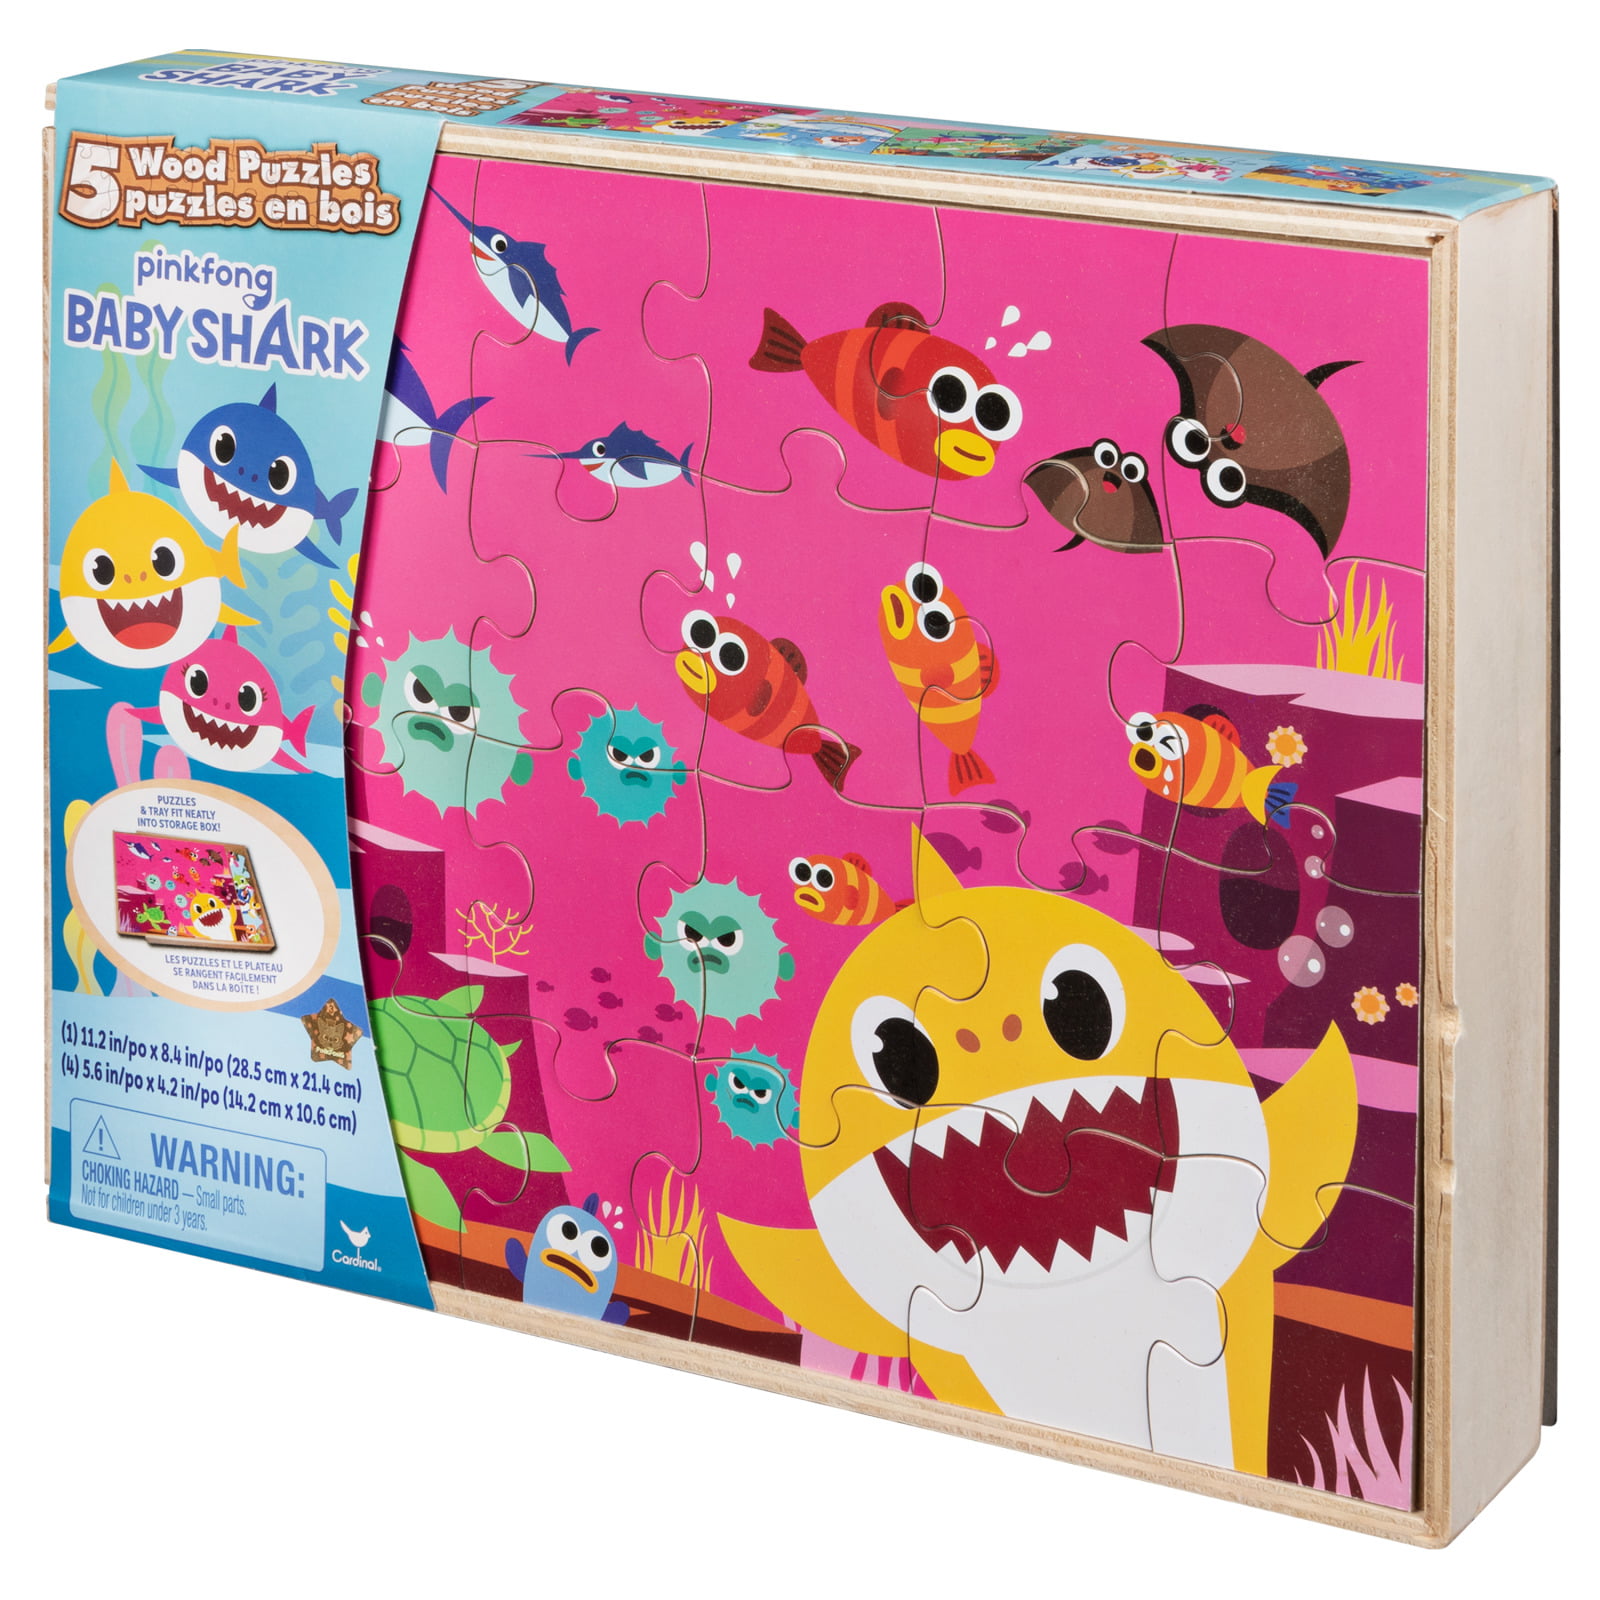 Details about  / Baby Shark 5 Wood Puzzles in Wooden Storage Box for Kids 4years /& up